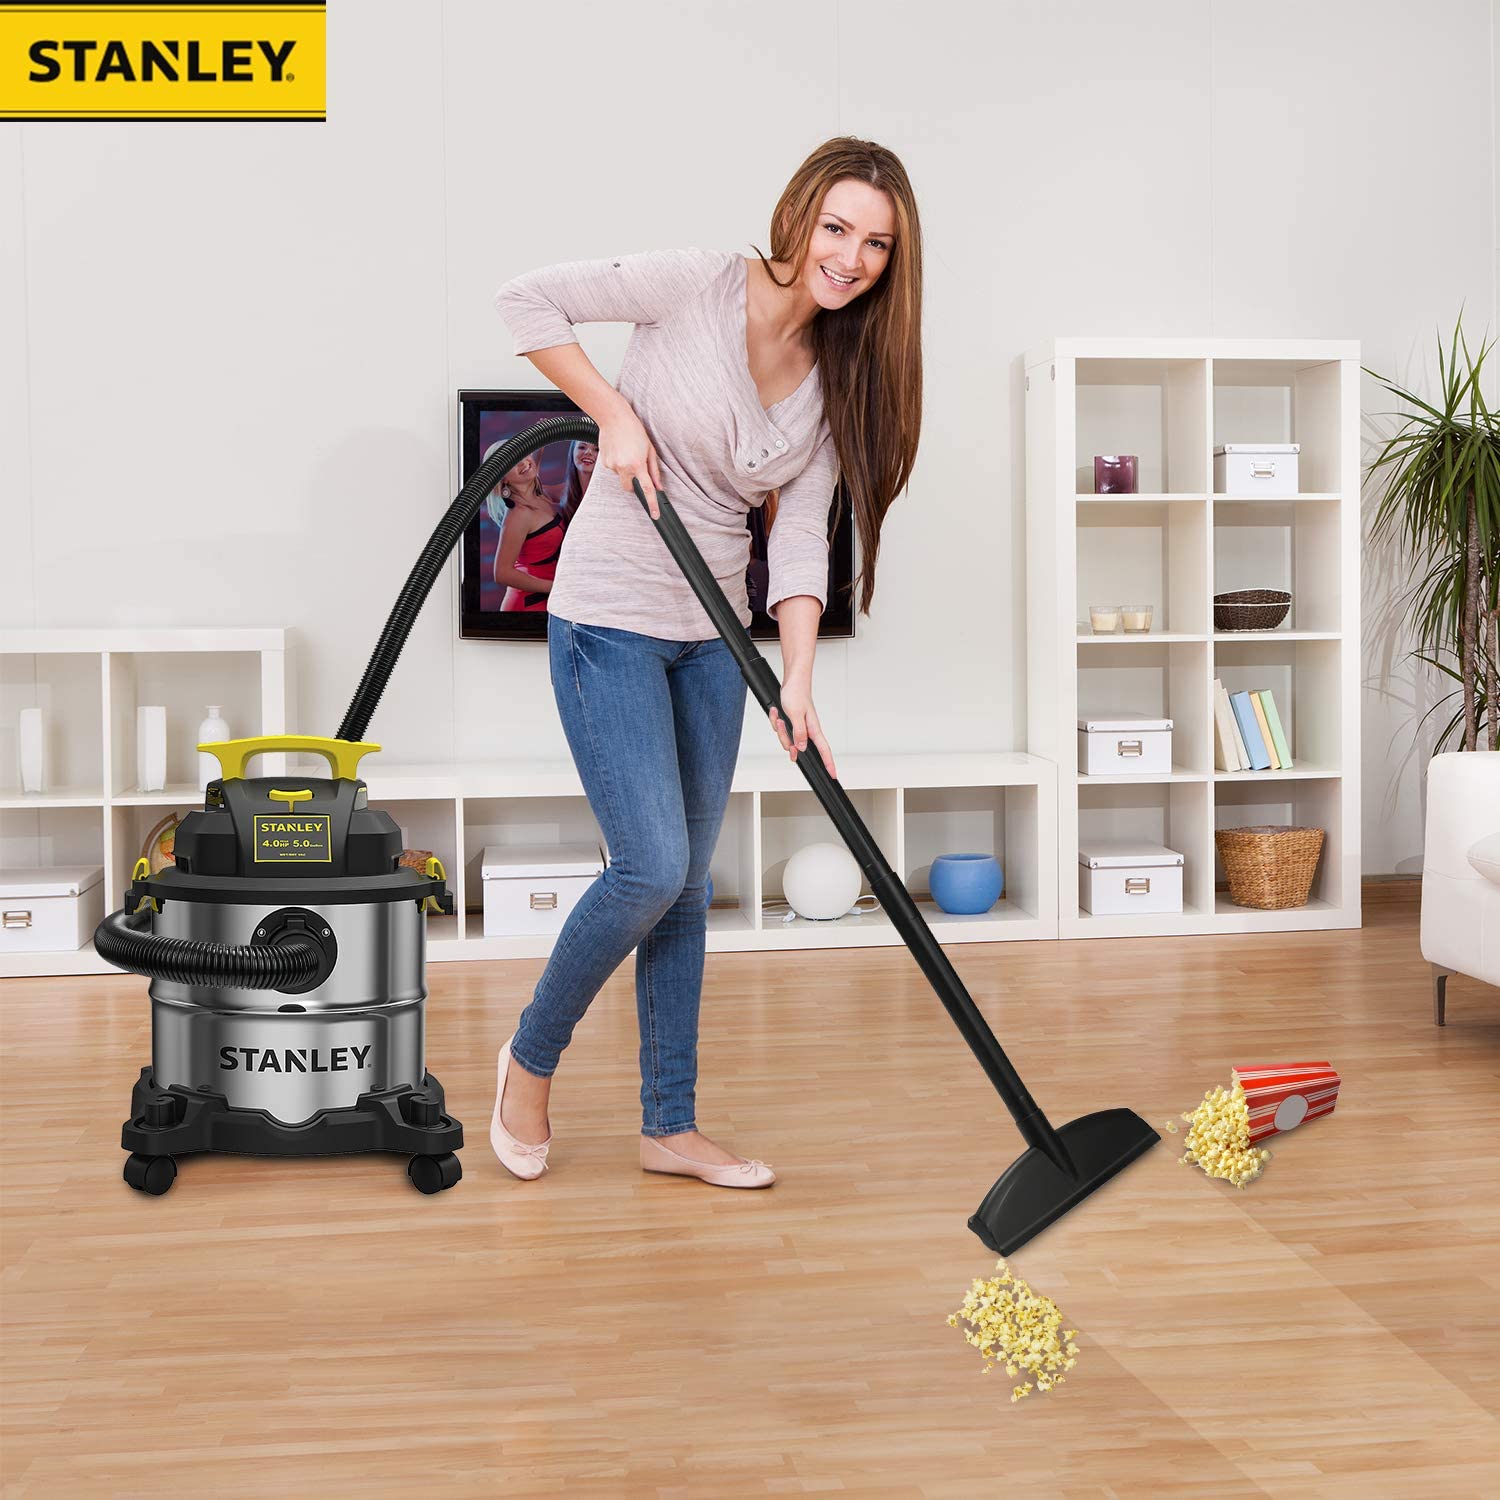 Top 10 Best Small Shop Vacs Reviewed (2023 Reviews) - Vacuum Cleaner ...